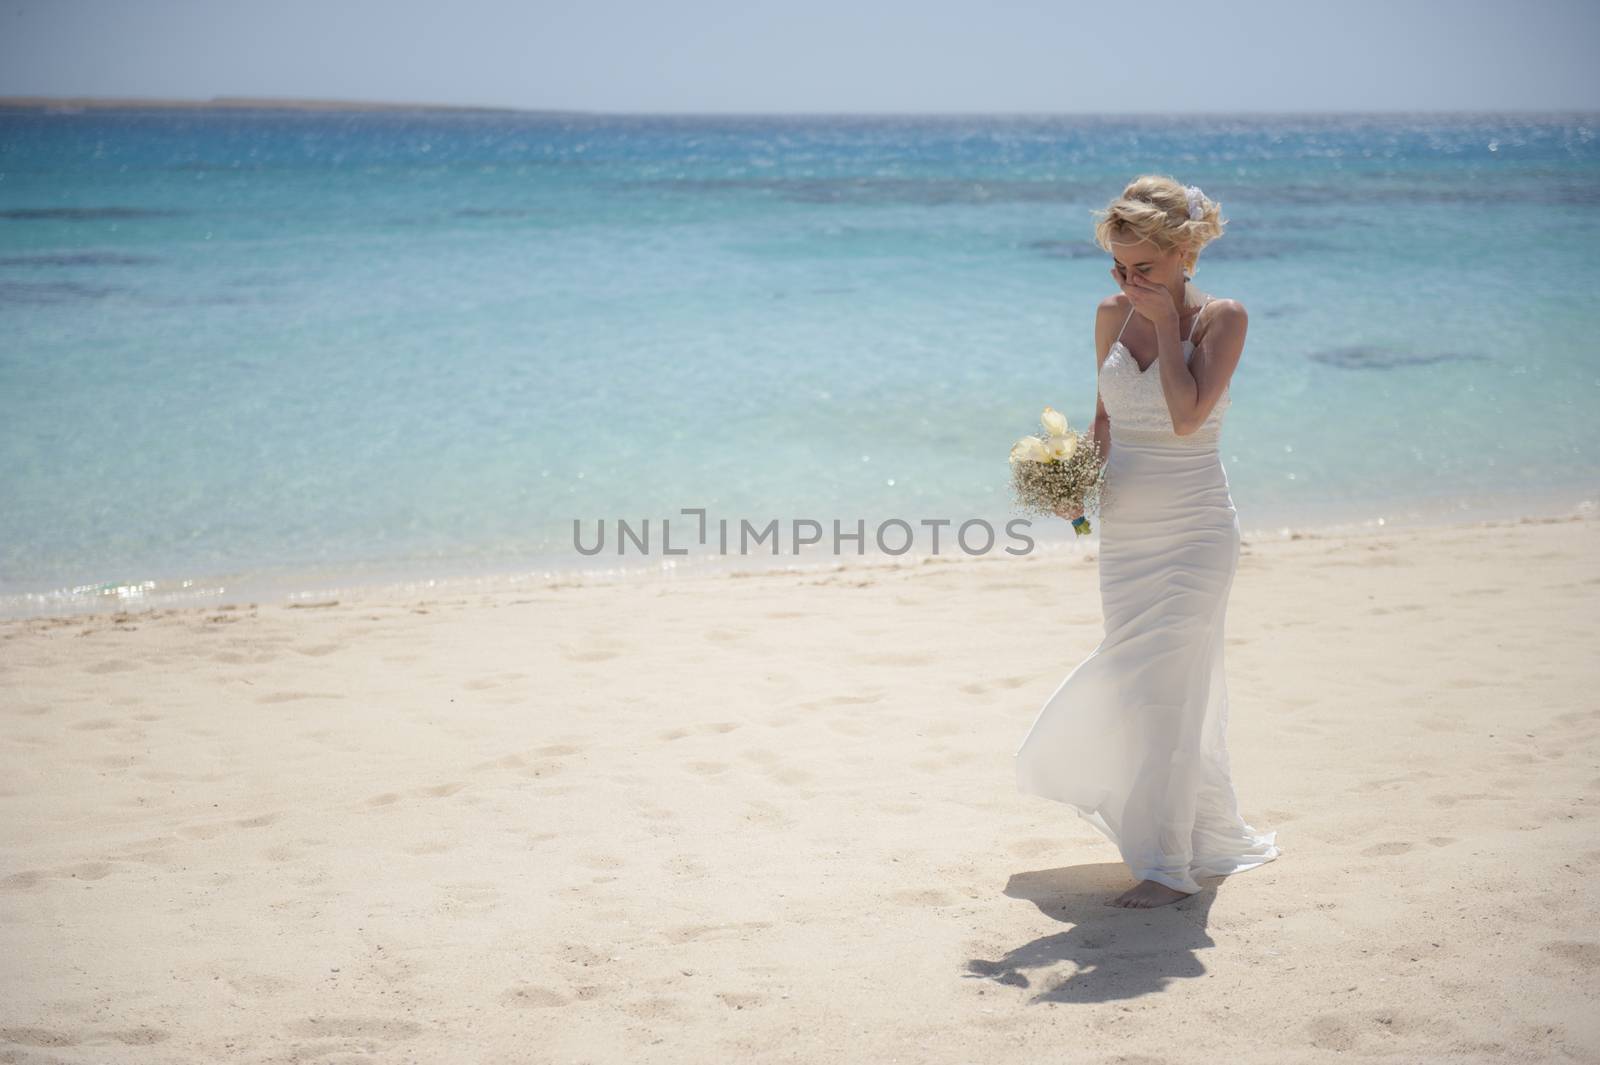 Beautiful woman bride at a tropical beach paradise on wedding day in white gown dress with ocean view